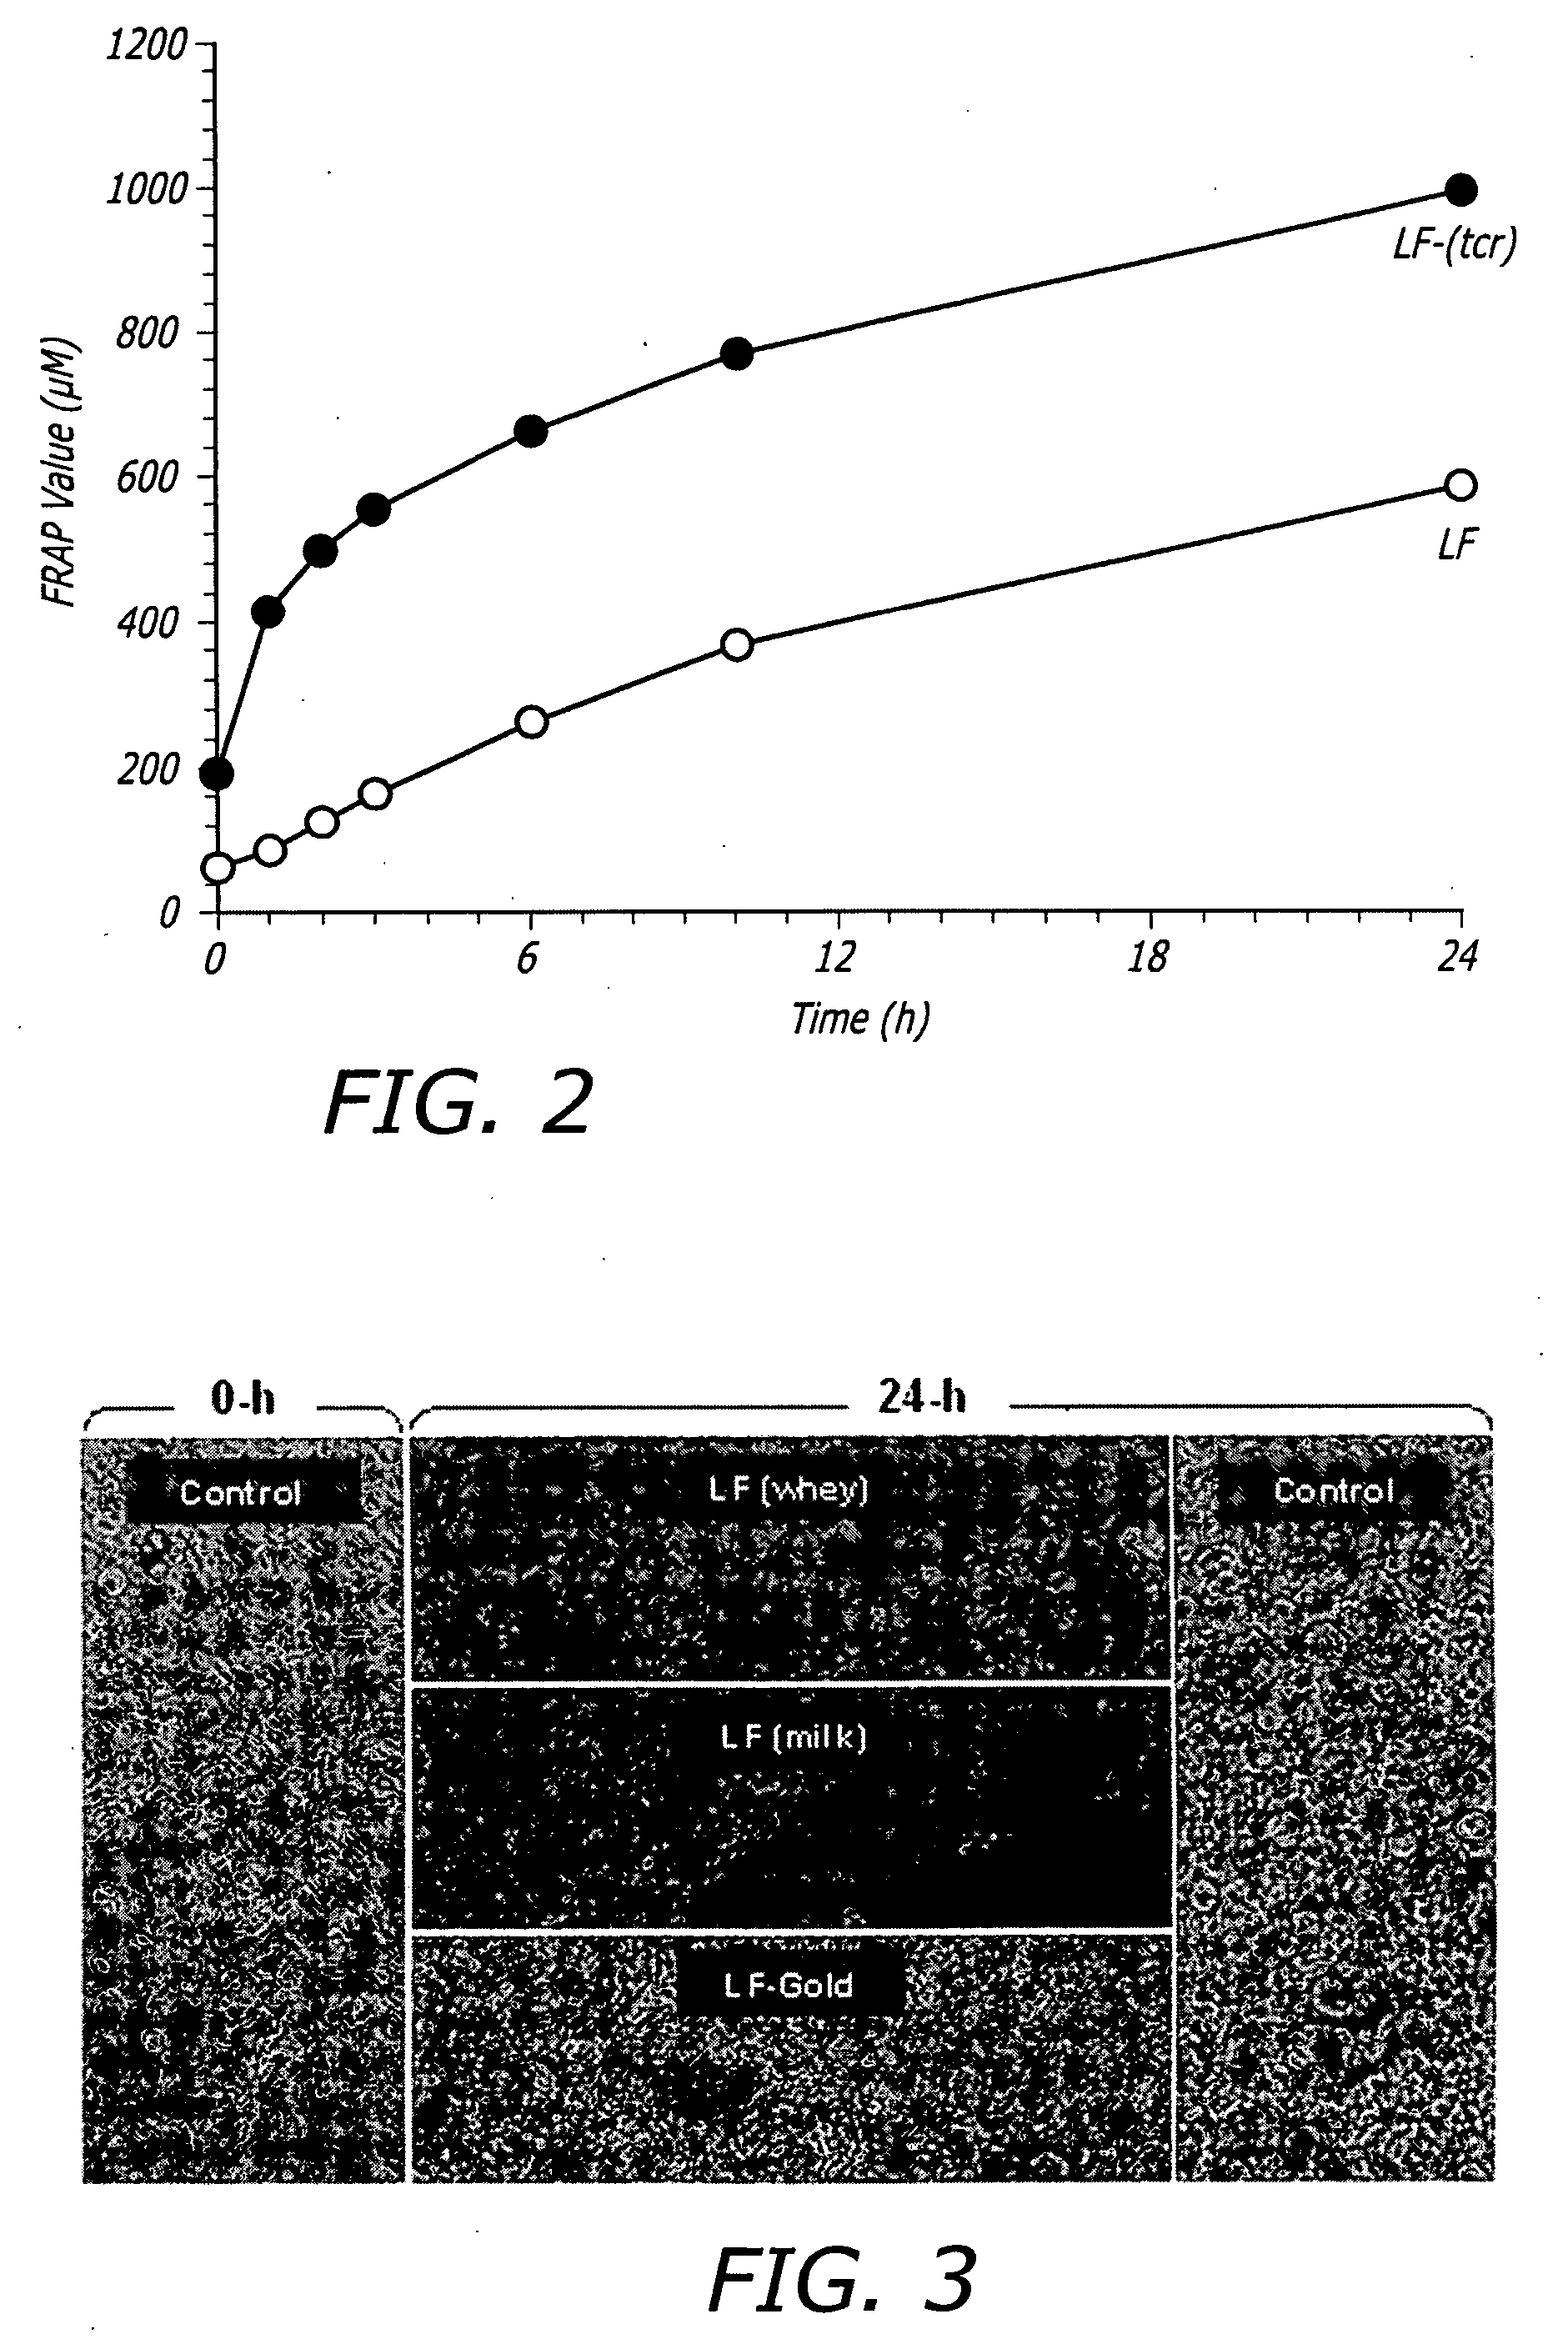 Treatments for contaminant reduction in lactoferrin preparations and lactoferrin-containing compositions